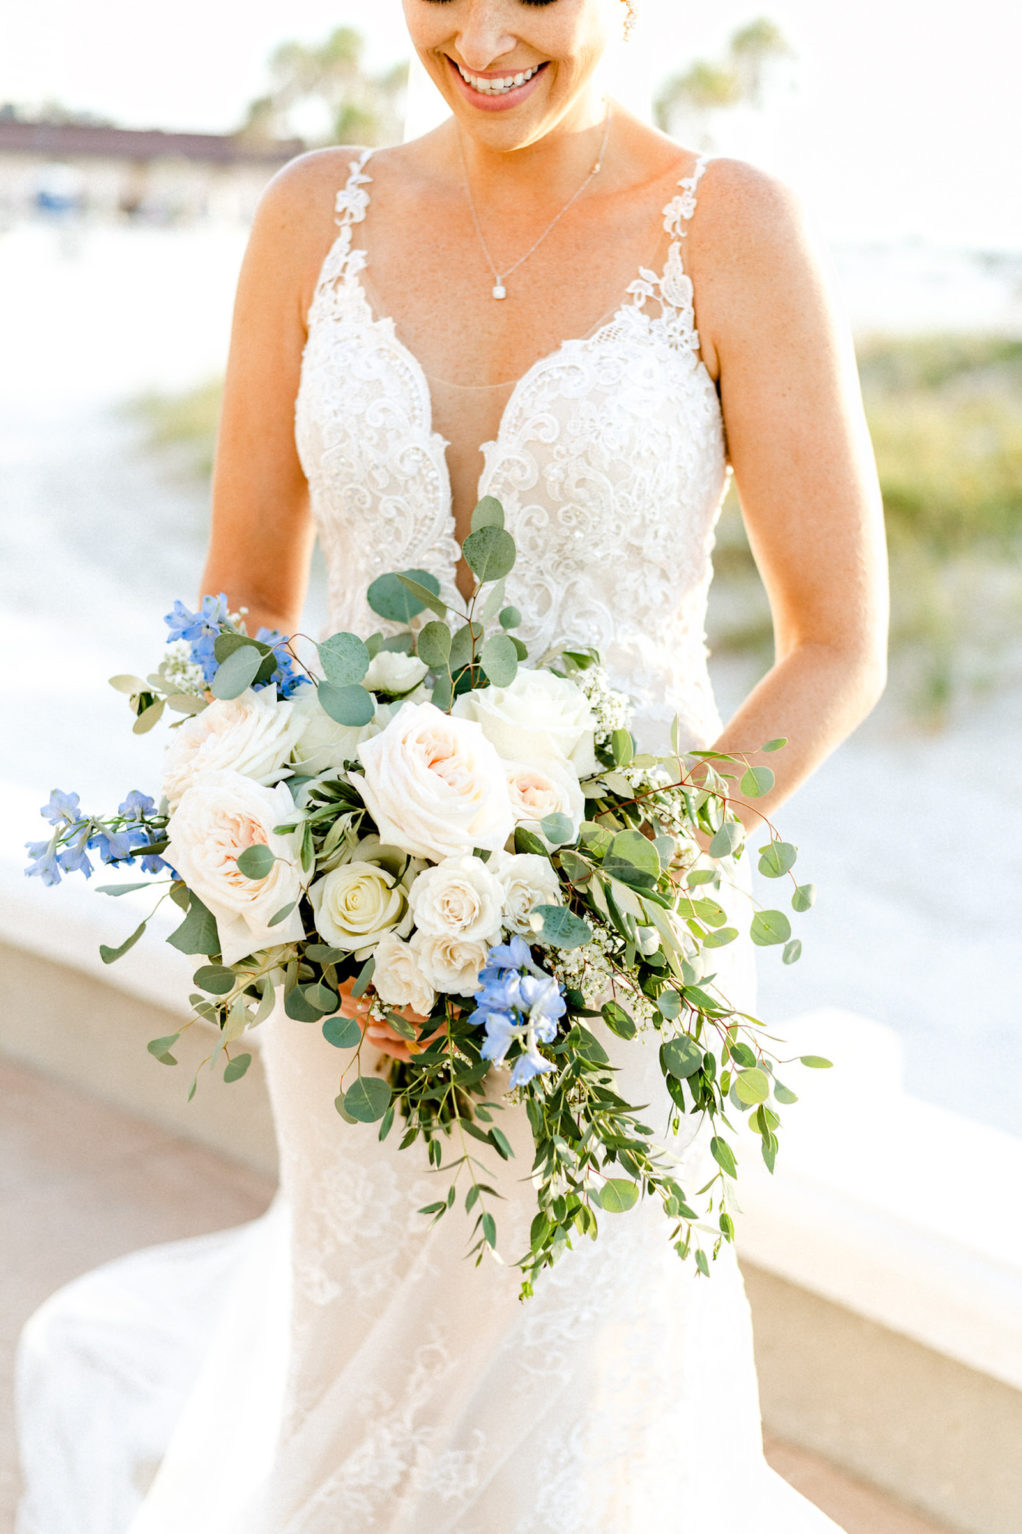 White Roses with Soft Blue Accent Bridal Bouquet | Dress: Wtoo Charisma Wedding Dress | Dewitt for Love Photography